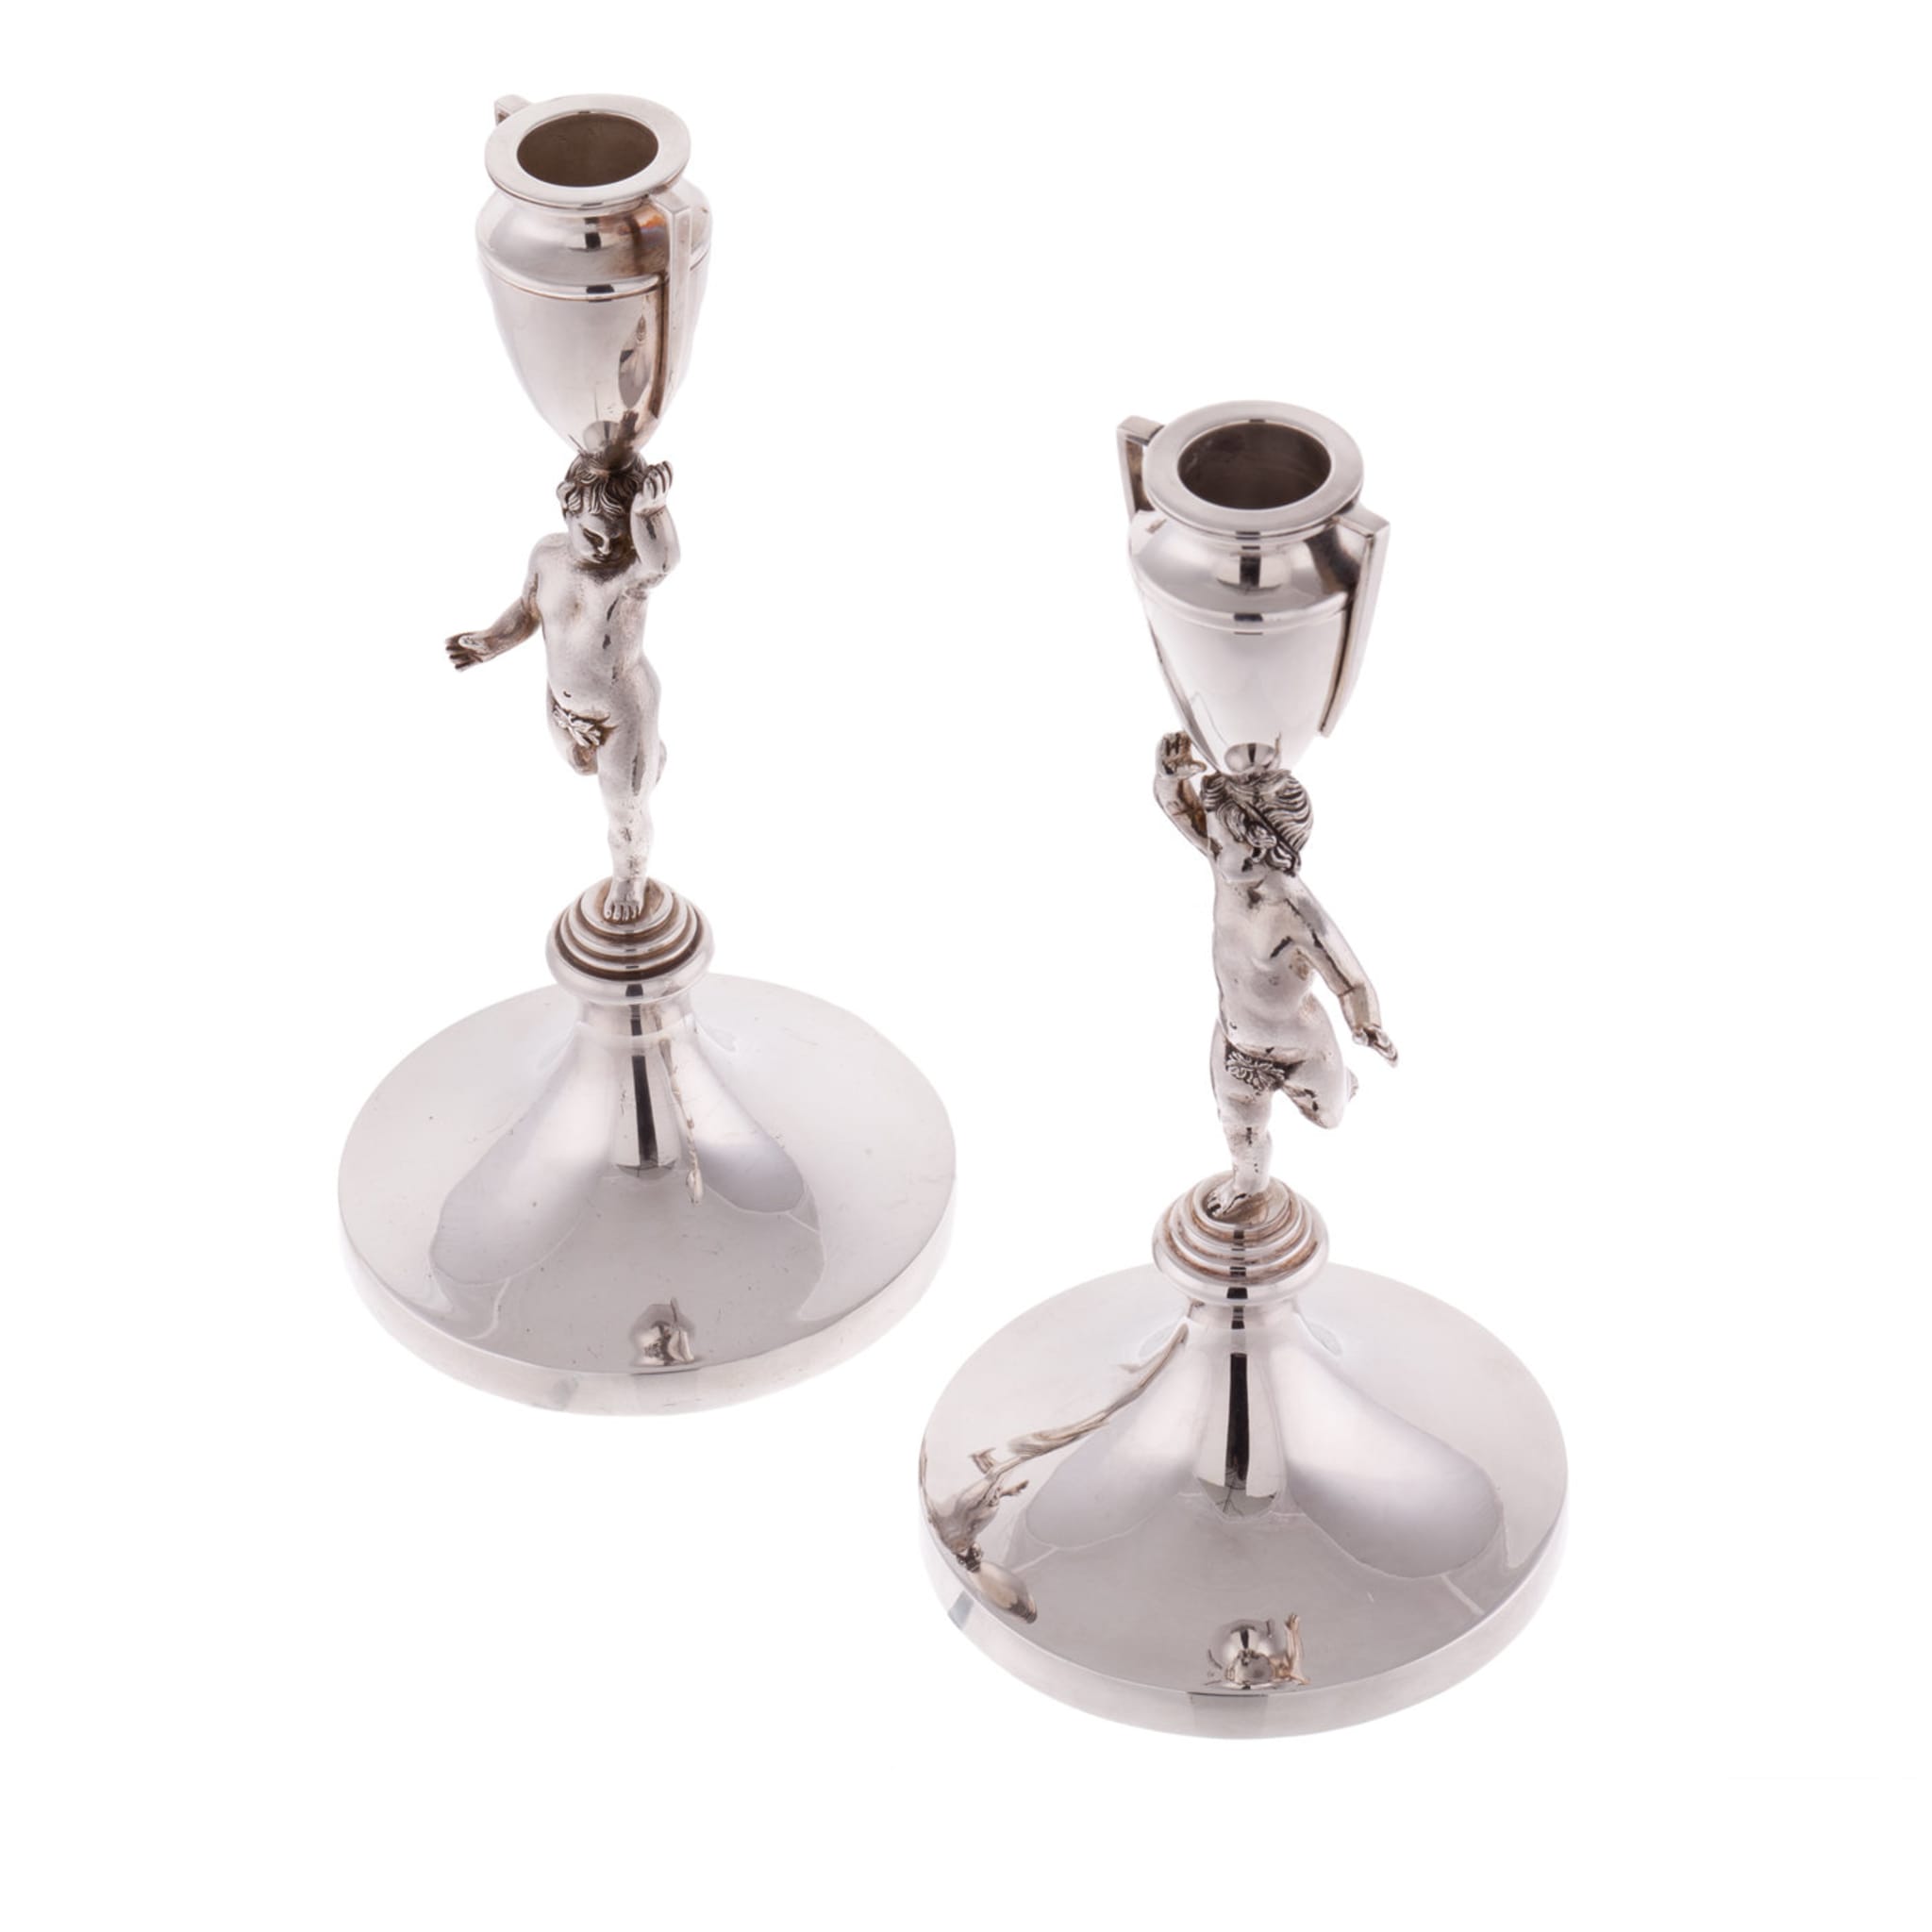 Pair of Pitti Sterling Silver Candlesticks - Alternative view 4